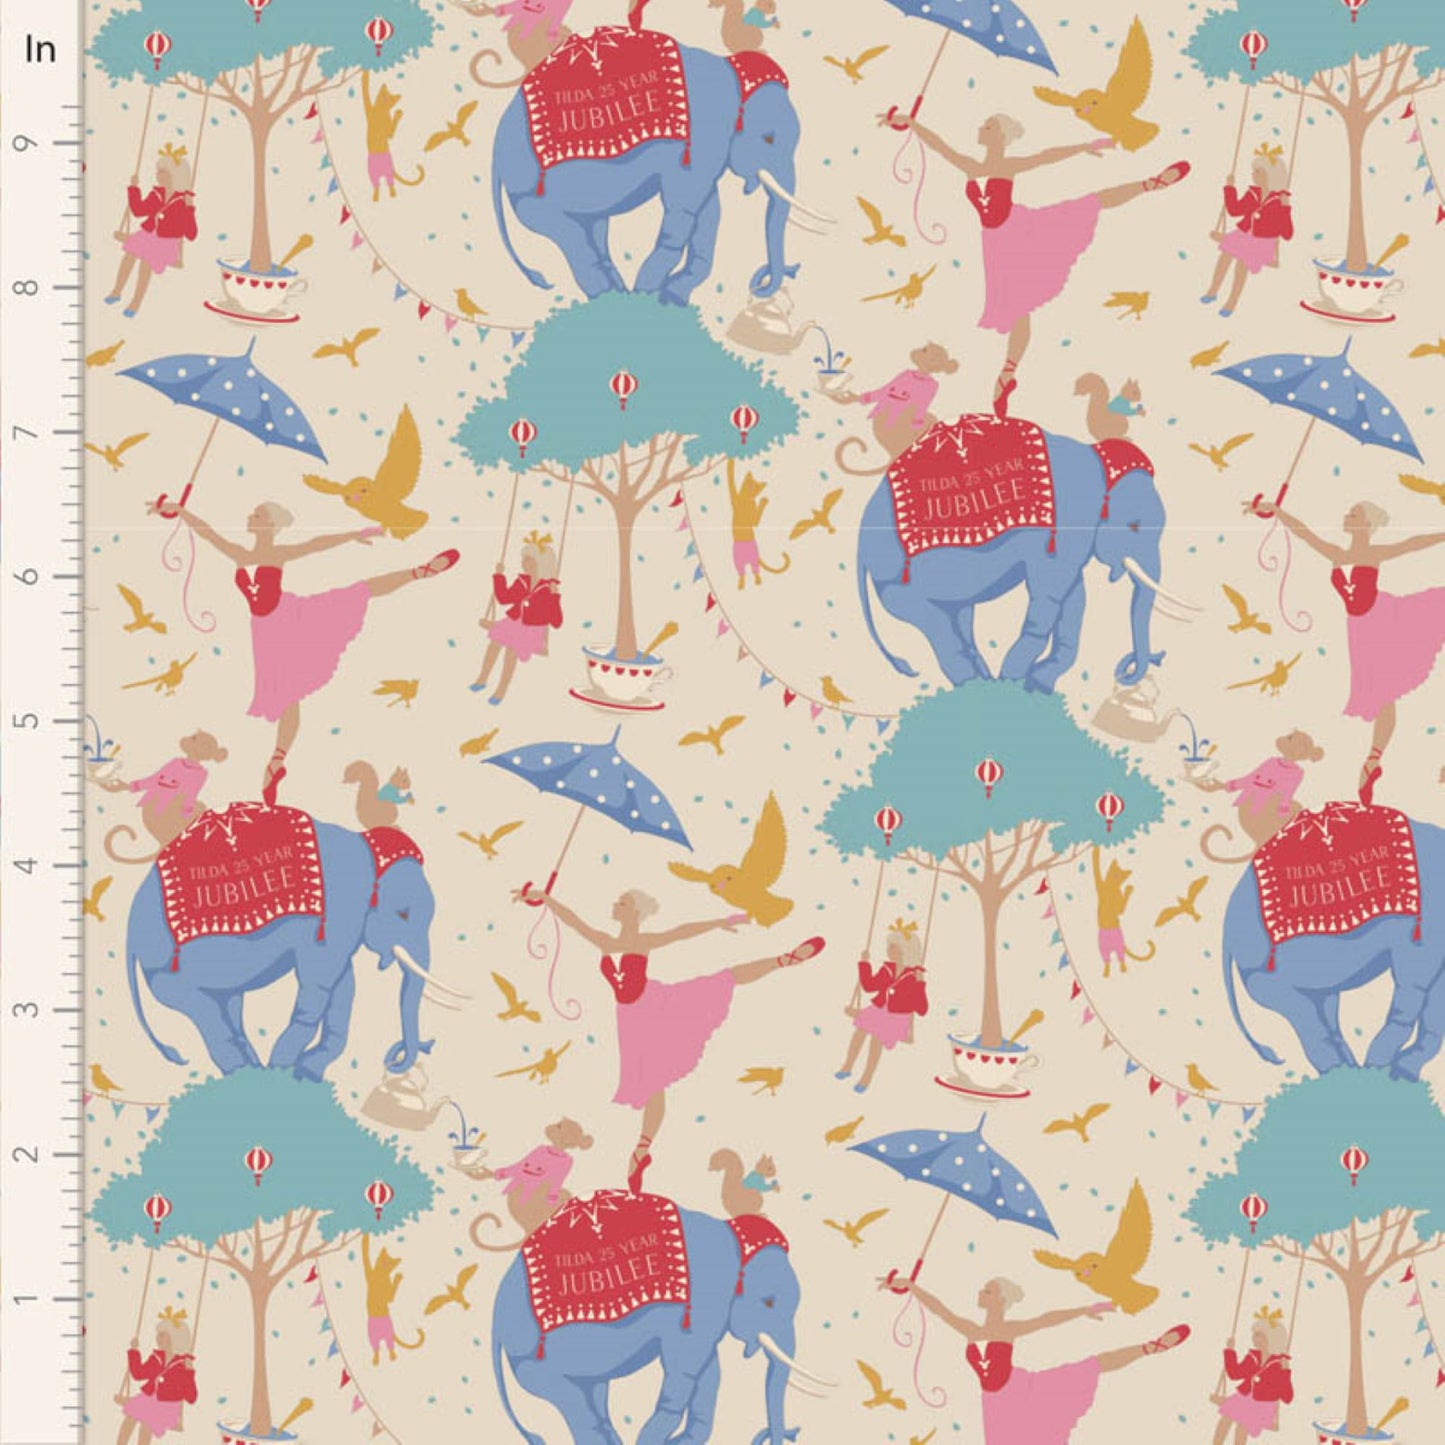 Tilda Jubilee Circus Life cream elephants acrobats floral cotton quilt fabric by the FQ + More